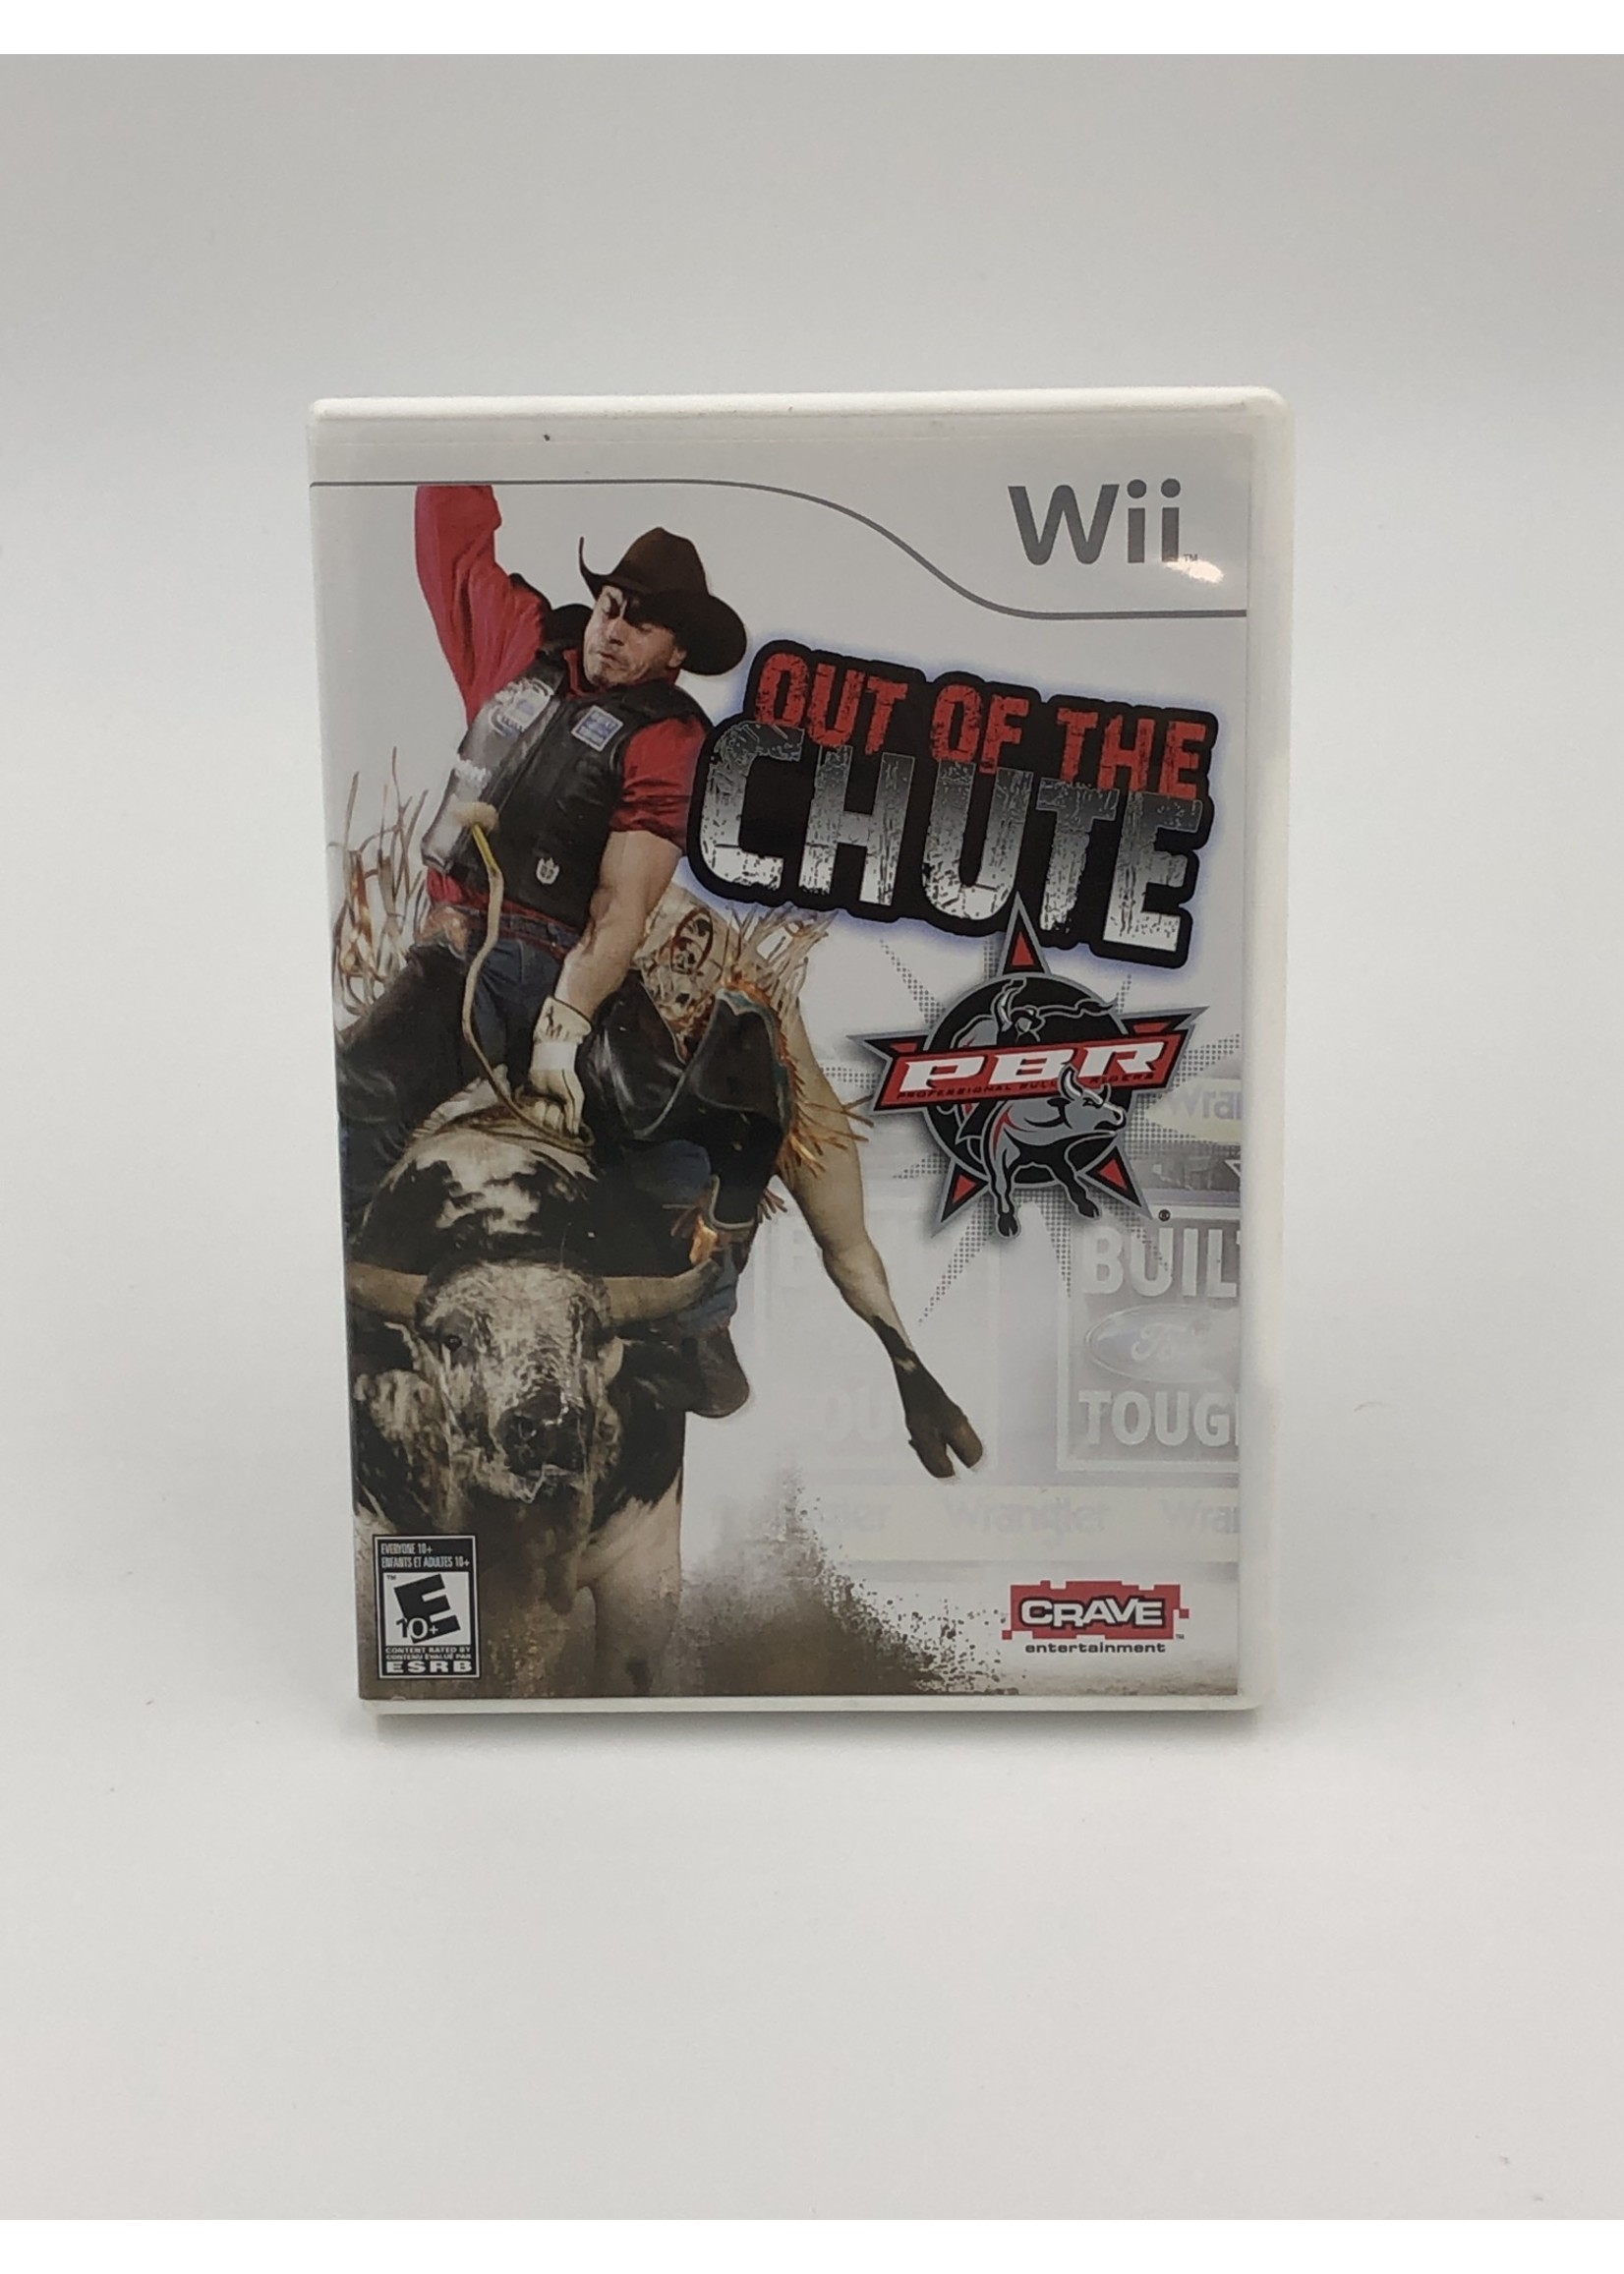 Nintendo   PBR: Out of the Chute - Wii